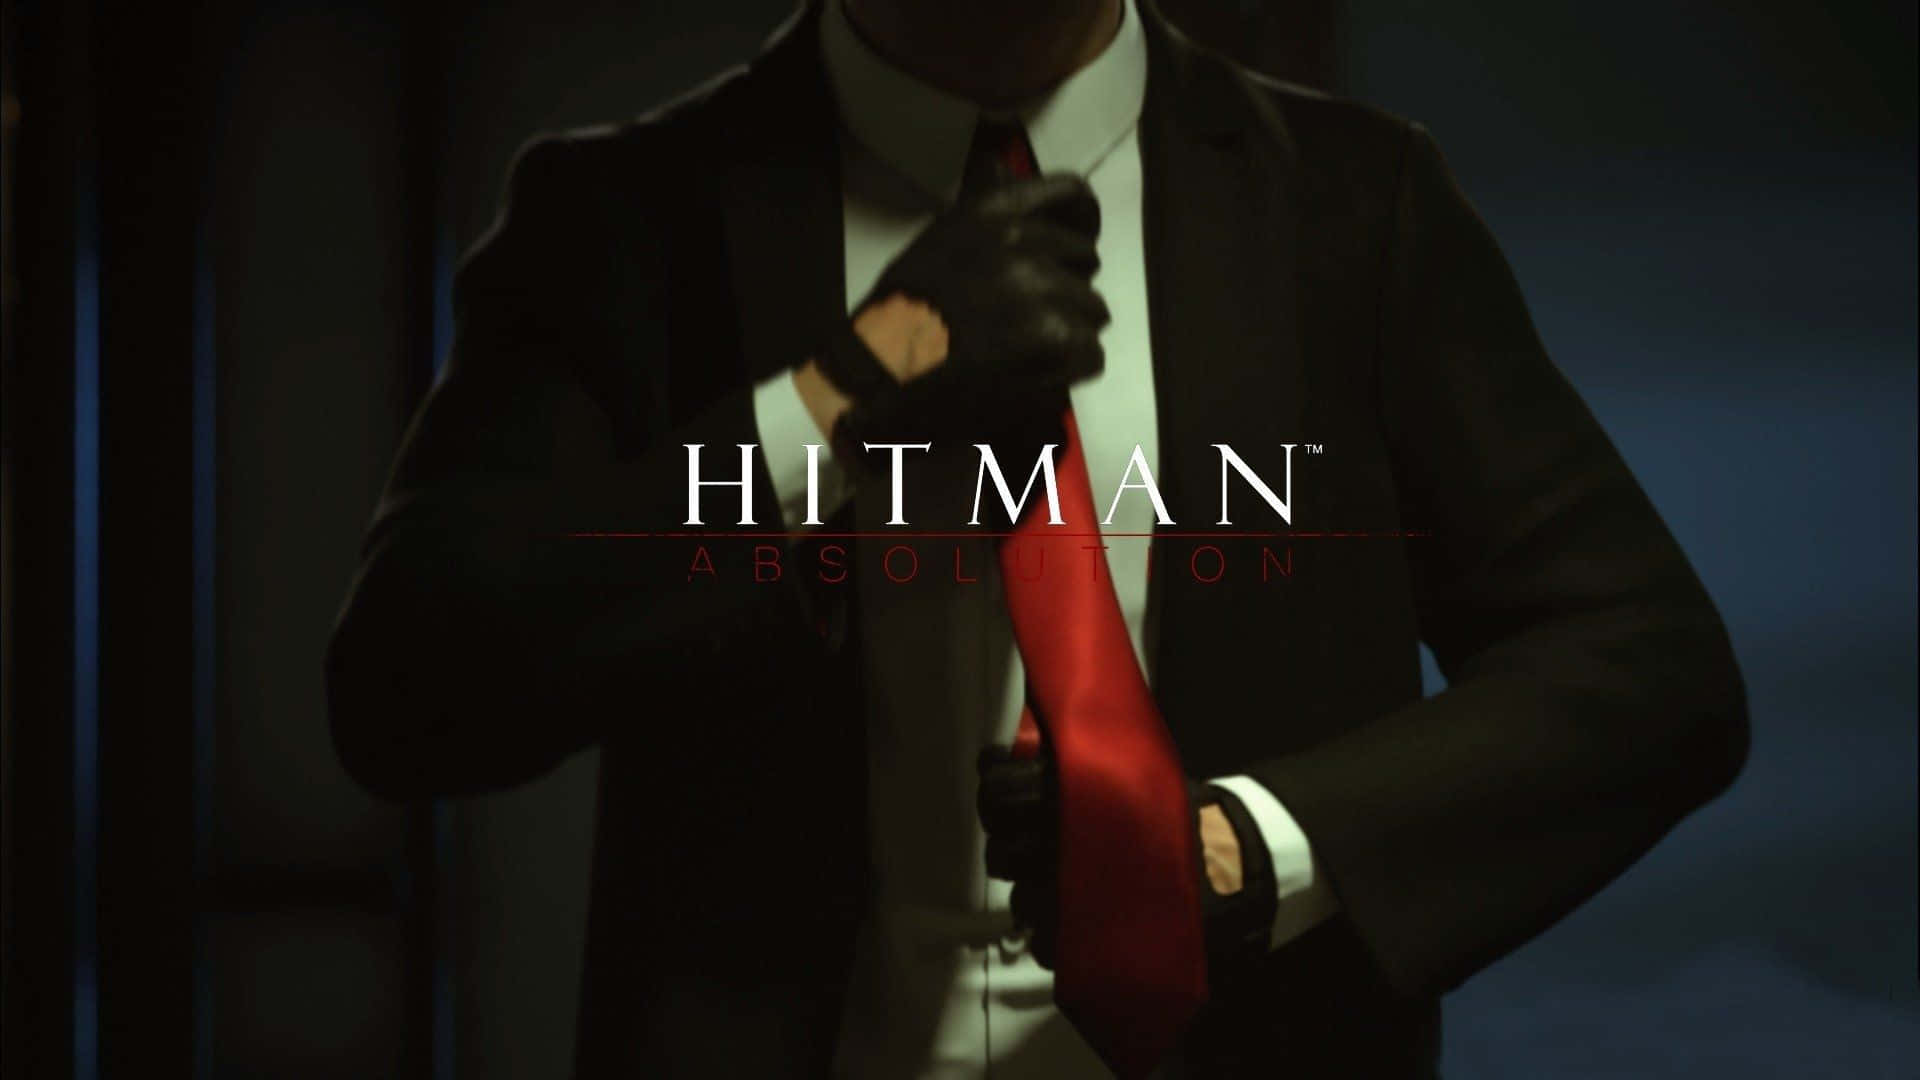 Hitman Absolution: An Action Adventure Video Game